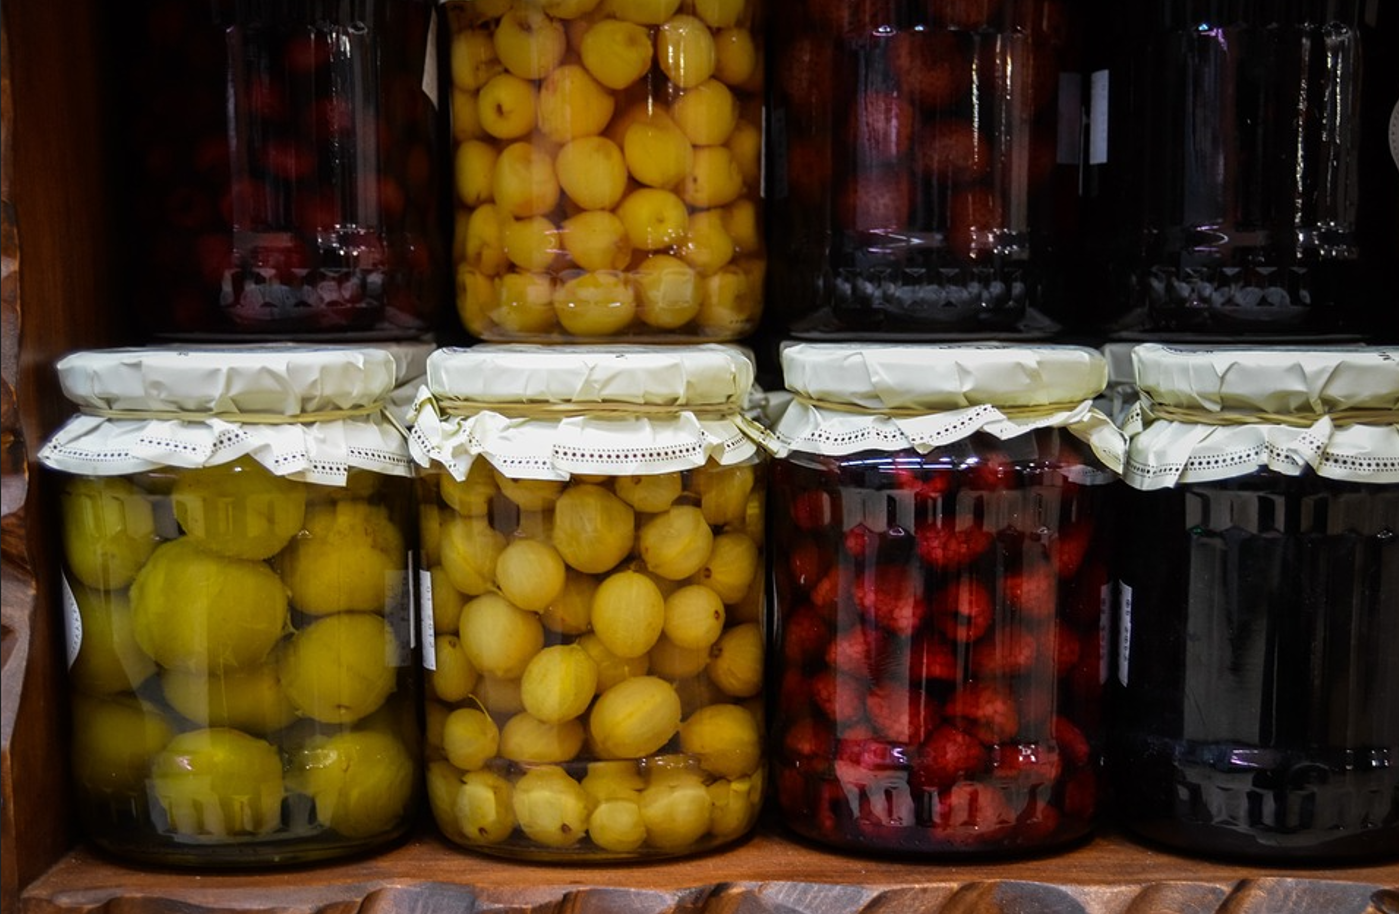 Which fruits and vegetables are not suitable for canning